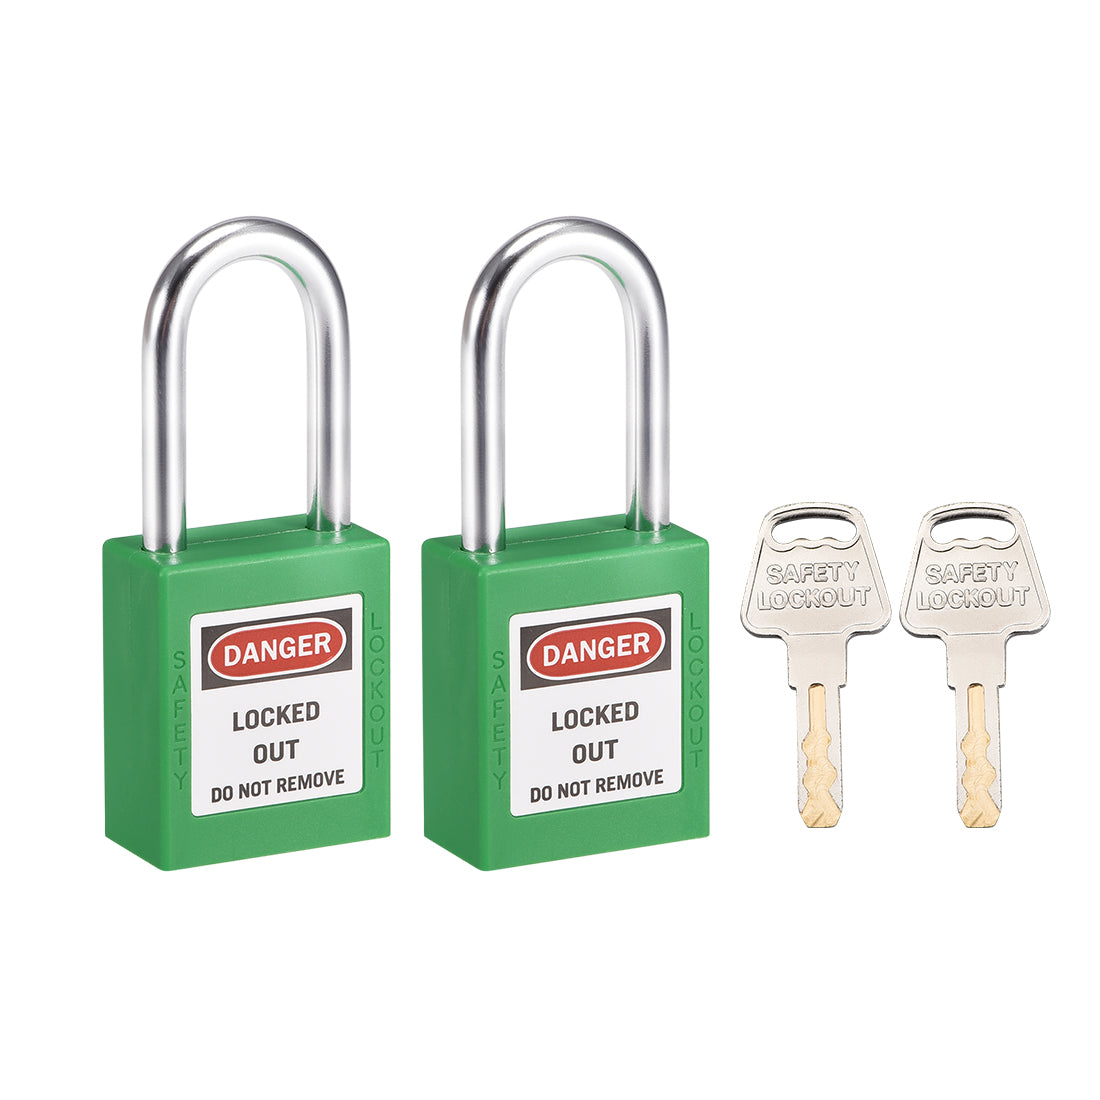 uxcell Uxcell Lockout Tagout Safety Padlock 38mm Steel Shackle Keyed Alike Light Green 2Pcs